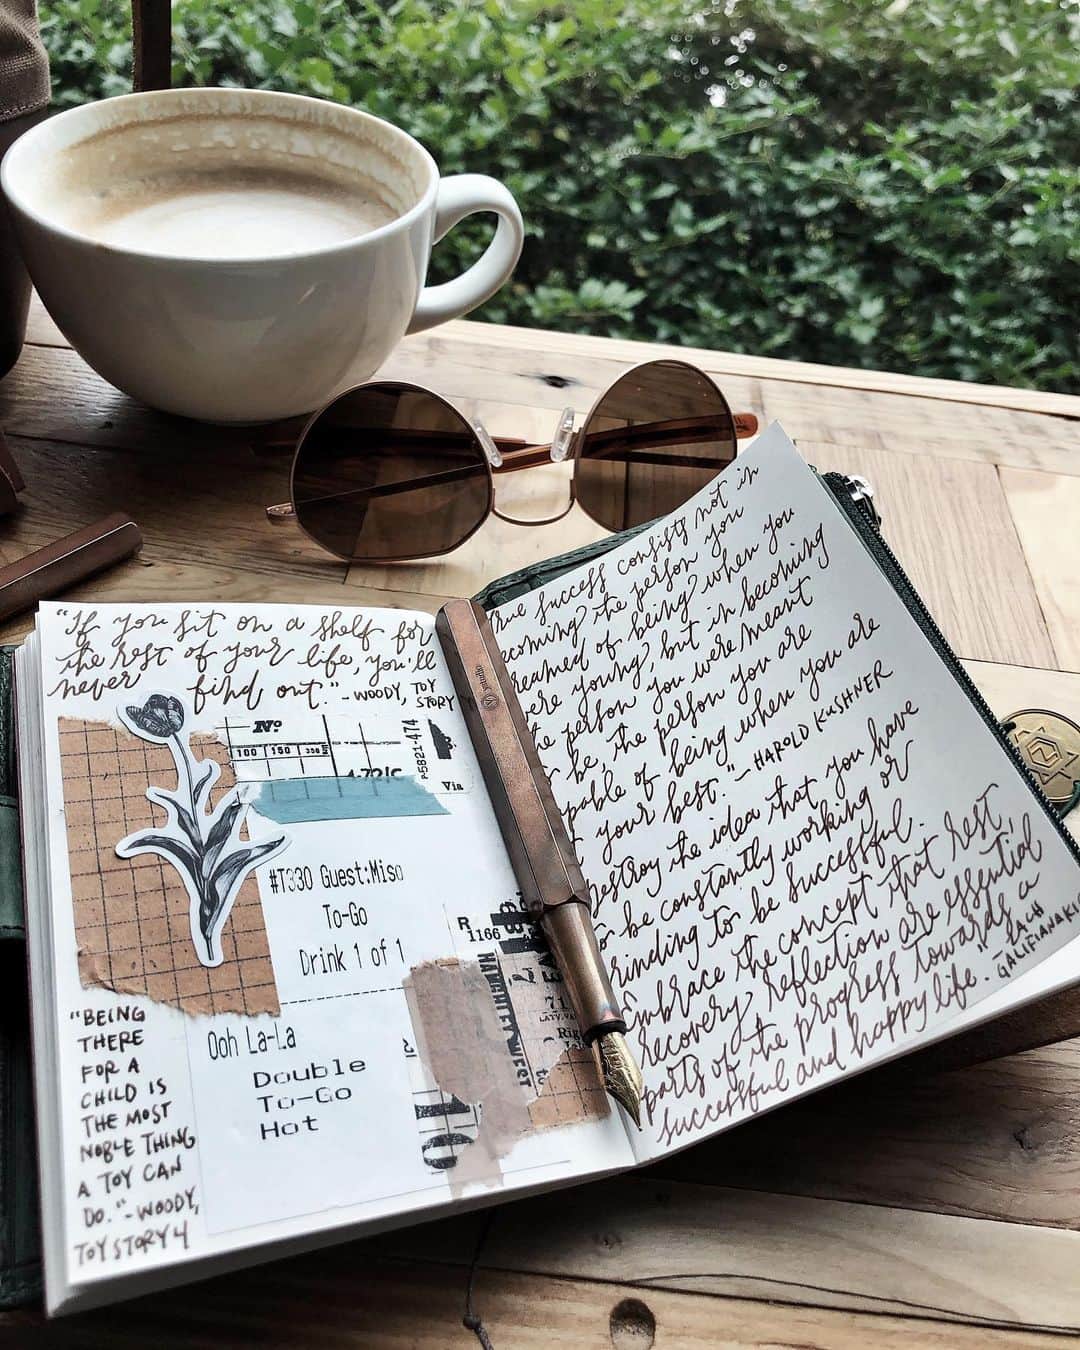 Catharine Mi-Sookさんのインスタグラム写真 - (Catharine Mi-SookInstagram)「Today is for quiet. And raindrops. Good coffee, journaling, and enjoying a slower pace. Today is for rest. And gratitude. Moments, loved ones and plenty of reflection. From my mug to yours, cheers to your day. I hope this Sunday refreshes the palette and brings each of you an inspiring week ahead. . . . “When you rise in the morning, give thanks for the light, for your life, for your strength. Give thanks for your food and for the joy of living. If you see no reason to give thanks, the fault lies in yourself.” -Tecumseh . . . A happy new addition to my EDC: the Hamilton sunnies by @randolph.usa. A new geometric shape from the reinvention of their two retired styles, Jefferson and Franklin. Their featherweight SkyForceTM lenses feature Polarization, Anti-Reflective and Oleophobic coatings. I chose the Autumn Sunset color, which gives a warm grey viewing experience. Oh and my favorite detail: my name custom engraved on the arms! A big thank you to #veteranownedbusiness @randolph.usa for sending these beauties my way! . . . Also featuring my tried and true portable copper @ystudiostyle fountain pen from @koheziamsterdam. TN Passport @nomadostore. Leather Student Pencil Case & Passport Wallet @galen_leather. Field Bag in Newcastle (and on sale!) @woodandfaulk. . . . #myrandolphs #sunnies #sunglassesfashion #journaling #ystudio #fountainpens #penmanship #midoripassport #nomadostore #トラベラーズノート #galenleather #leathercraft #woodandfaulk #whatsinmybag #creativejournal #dailyjournal #stationery #stationerylove #handsinframe #coffeeshopvibes #coffeenclothes #moodygram #creativespace #aquietstyle #plannercommunity #thedailywriting #midoritravelersnotebook」7月8日 3時56分 - catharinemisook